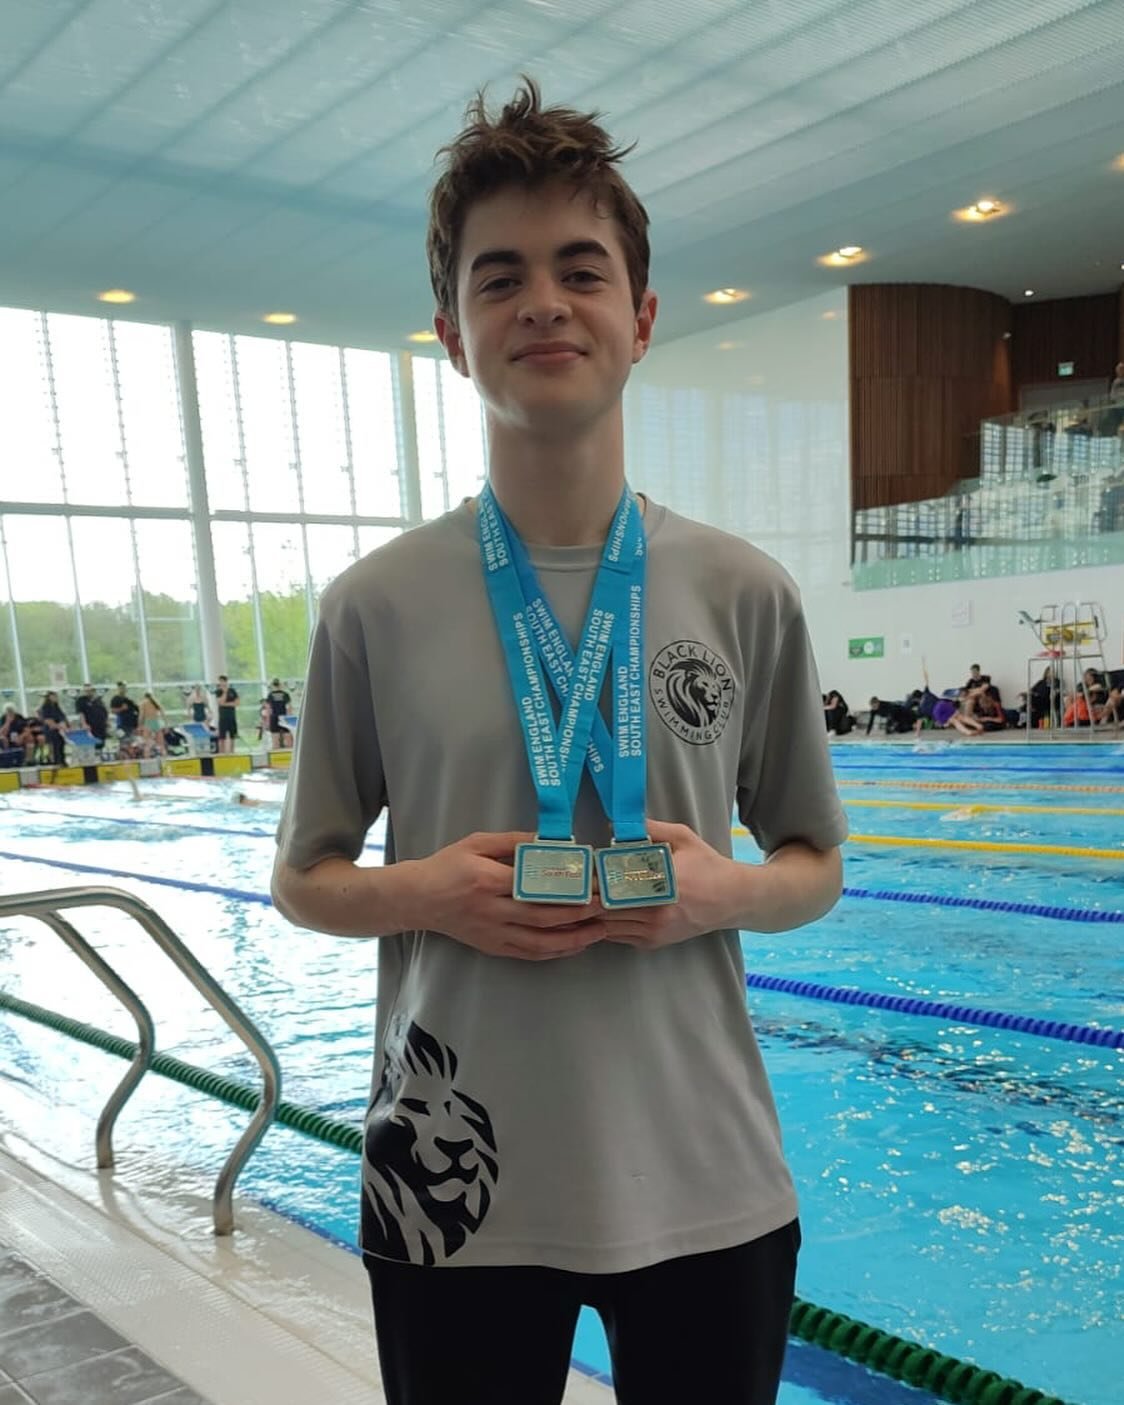 Big congratulations to Noah for his Silver 🥈 medal won in this mornings 50m breaststroke 🏊🏻&zwj;♂️ fantastic swim Noah 💪 #southeastregionalswimmingchampionships #fastswimming #competitiveswimming #greenwichuniversity #swimskins #rulethepool